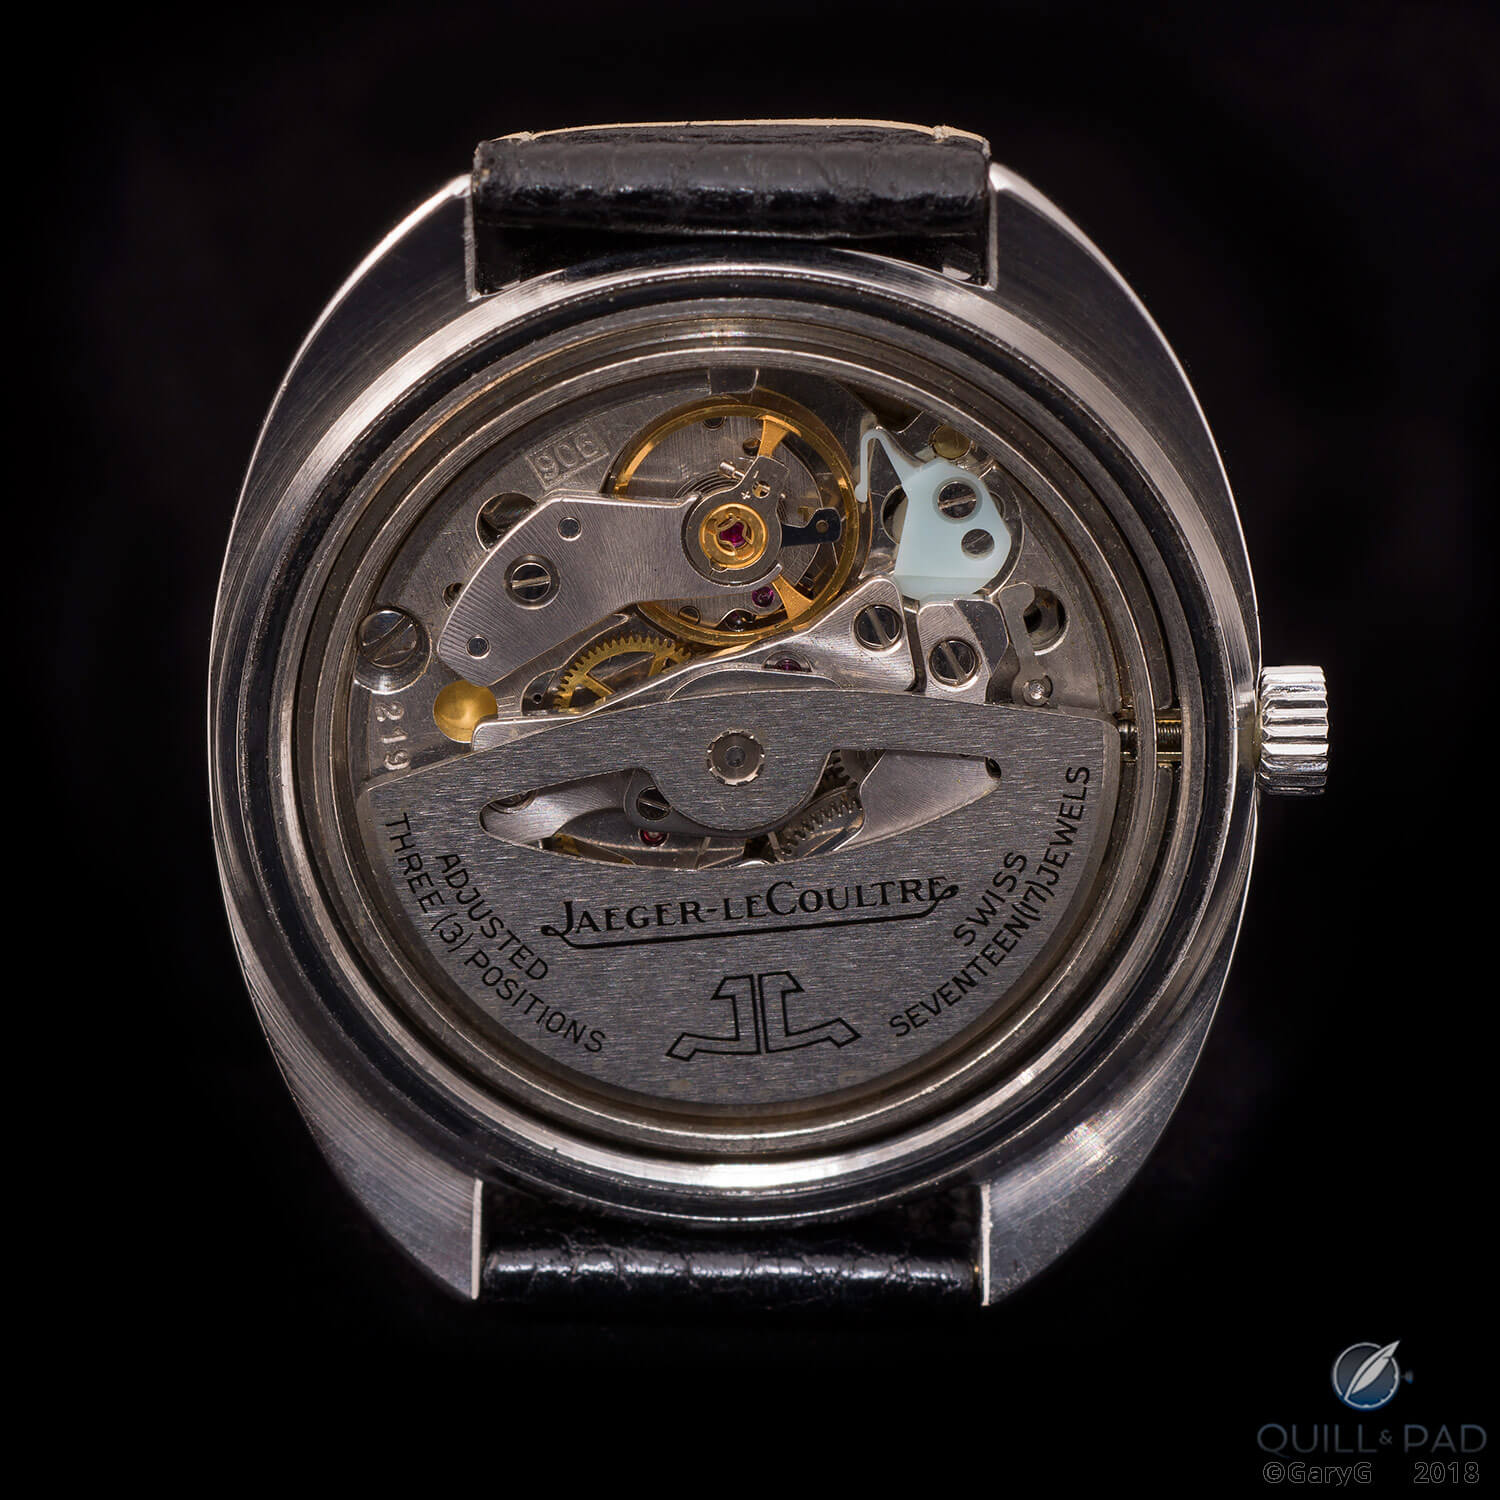 Jaeger-LeCoultre Caliber 906 with hacking mechanism visible at upper right